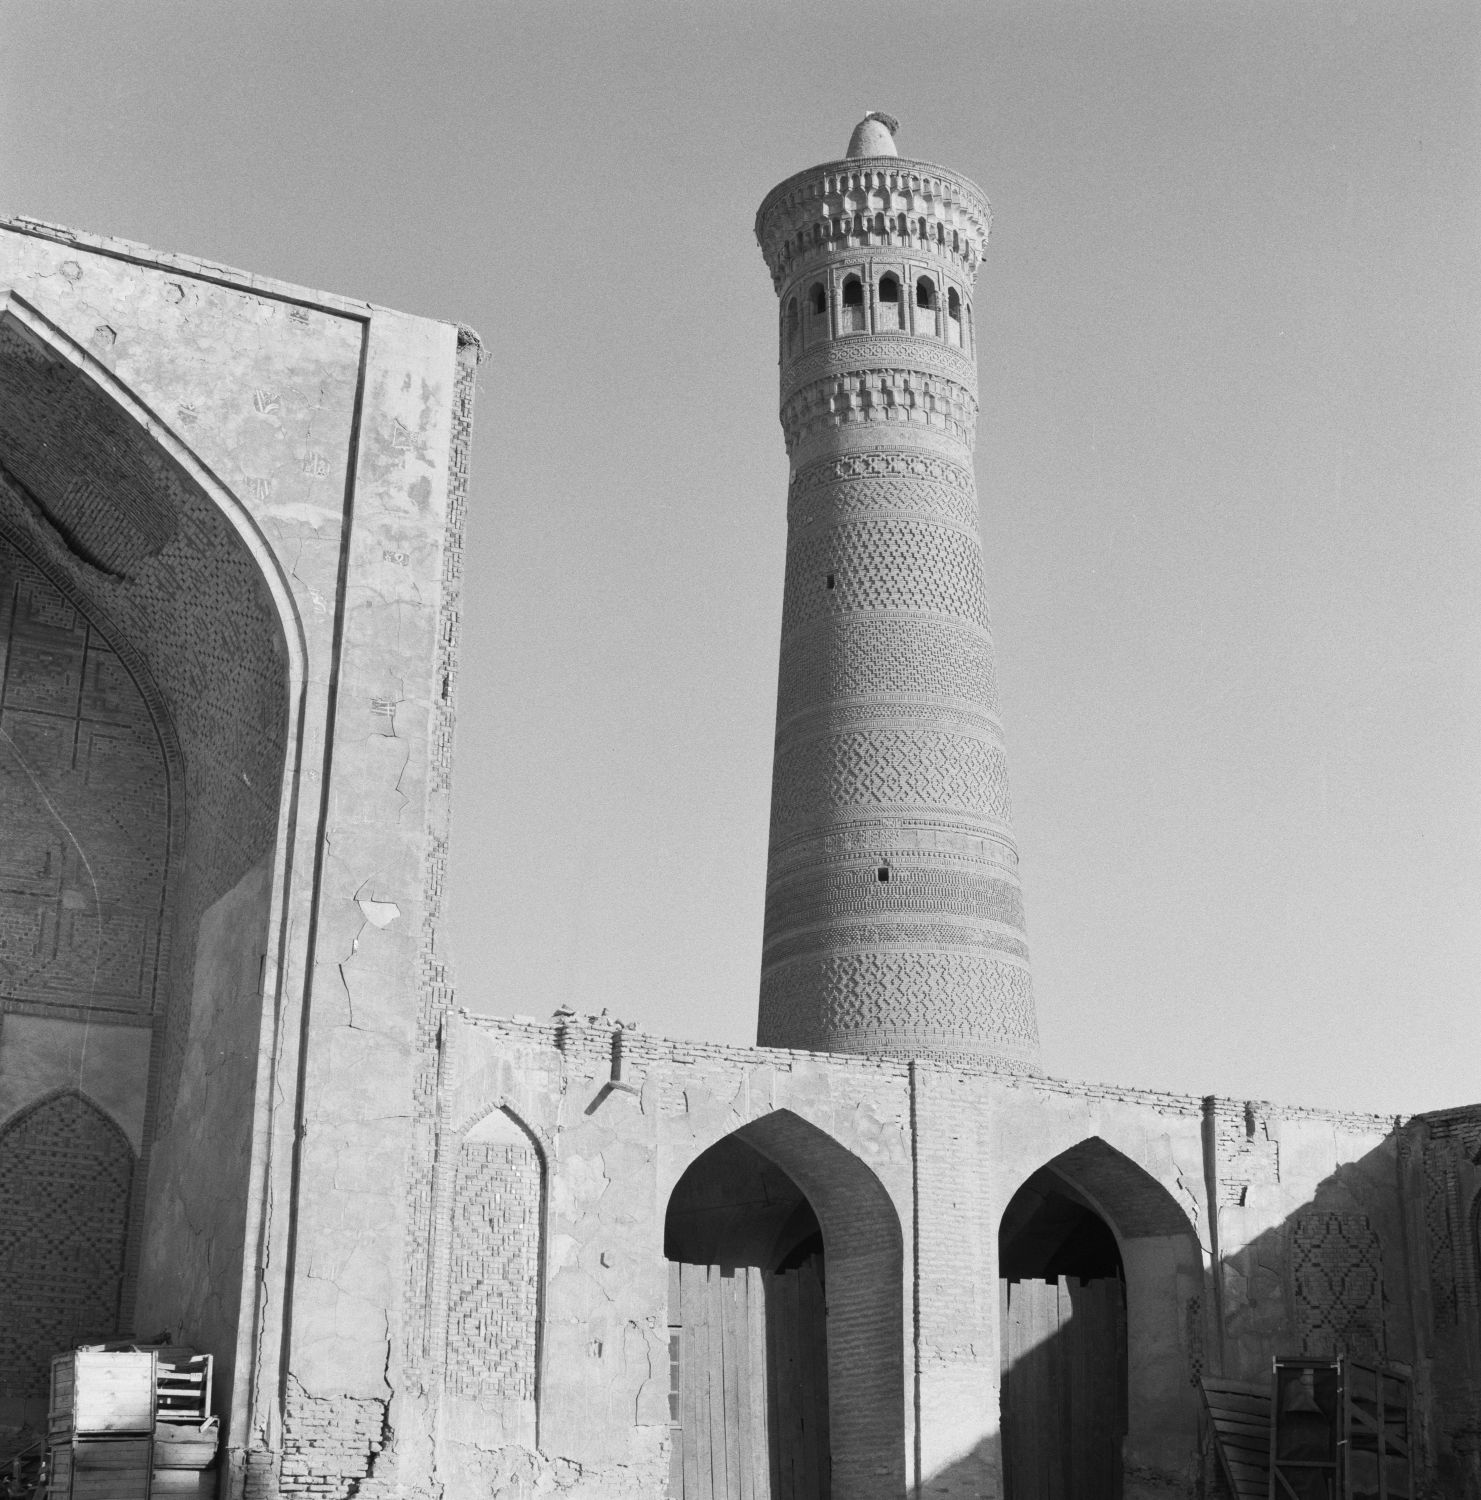 View of the minaret and entrance portal from courtyard.